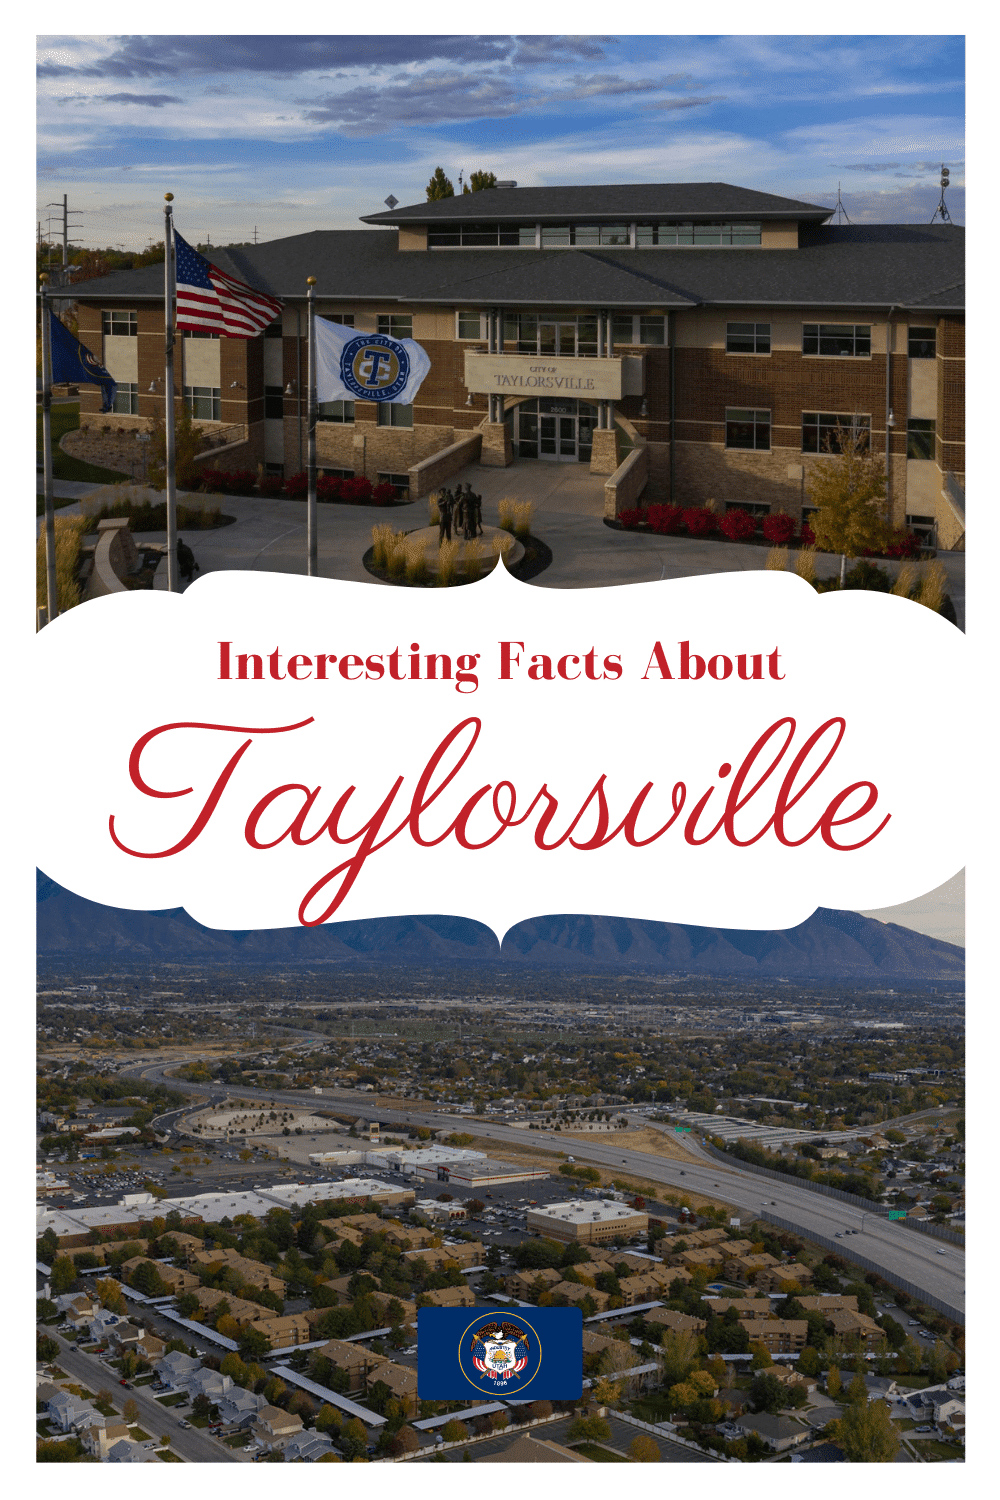 Facts About Taylorsville, Utah